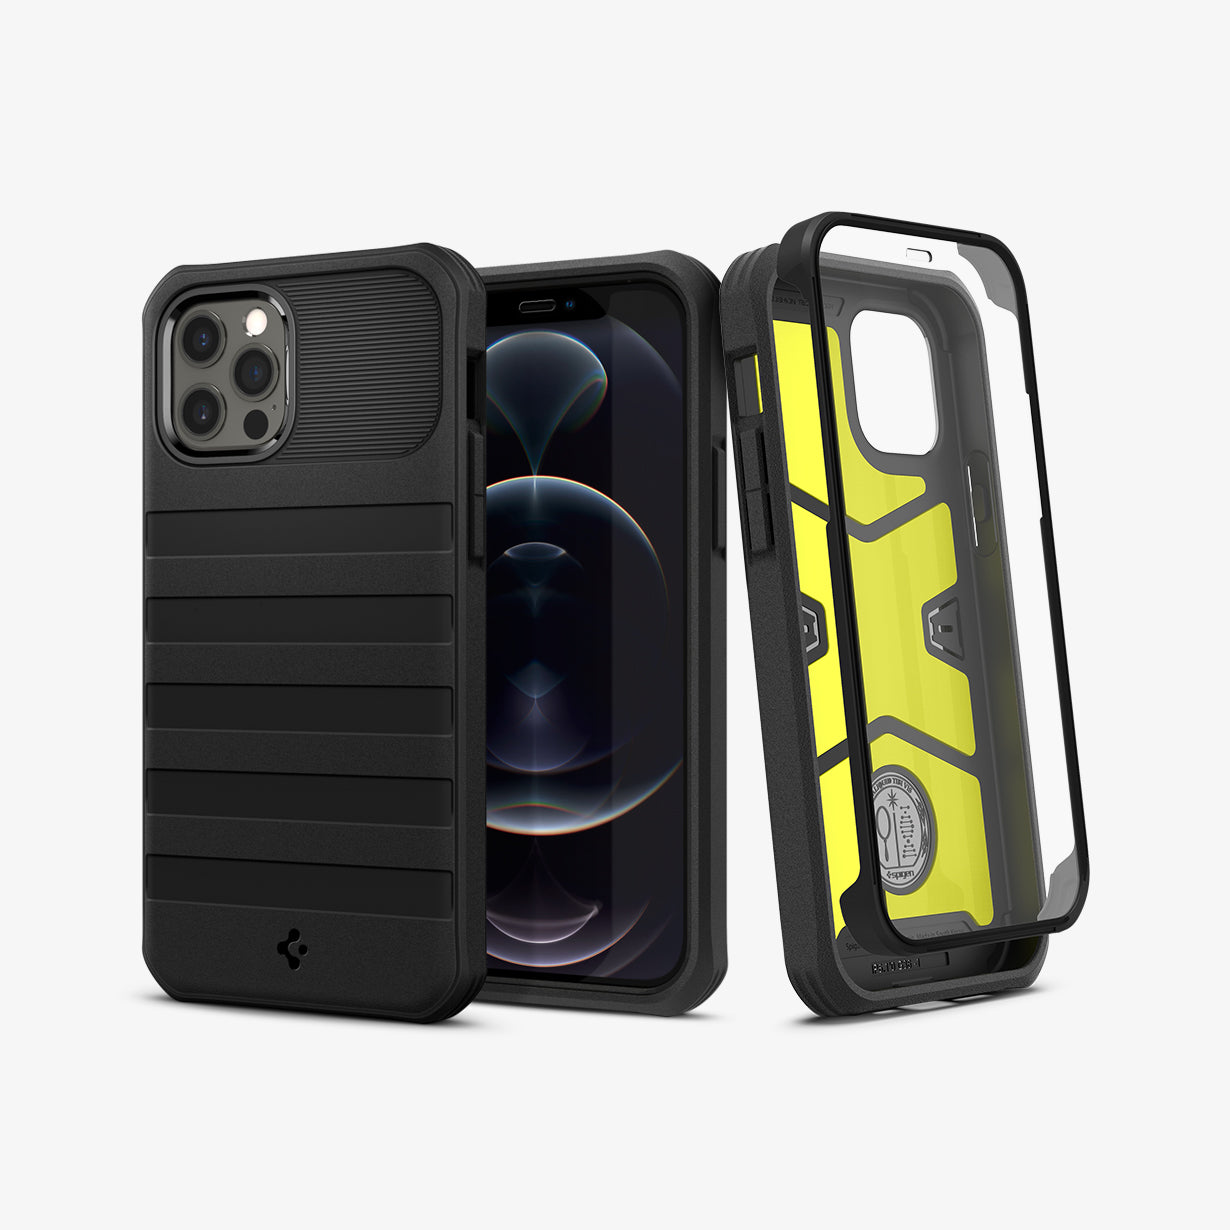 ACS02951 - iPhone 12 / iPhone 12 Pro Case Geo Armor 360 in black showing the back, front and inside